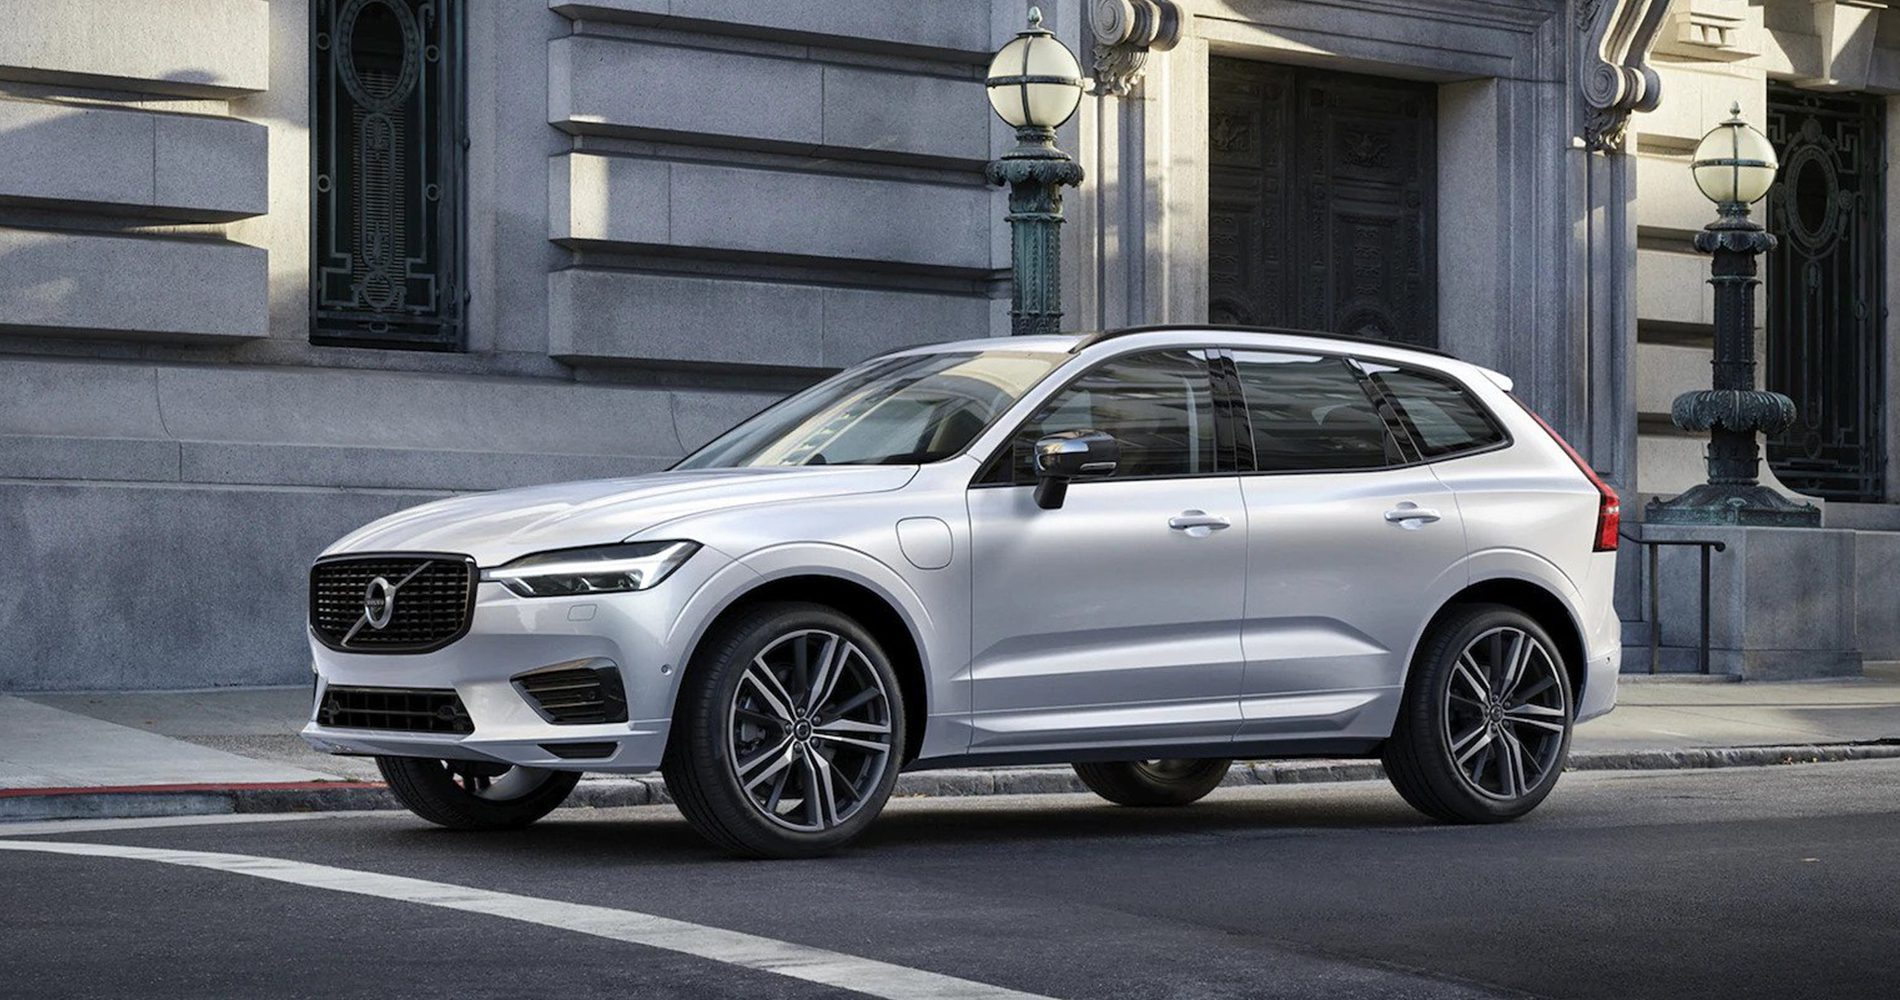 2022 Silver Volvo XC60 Recharge PHEV SUV on city street